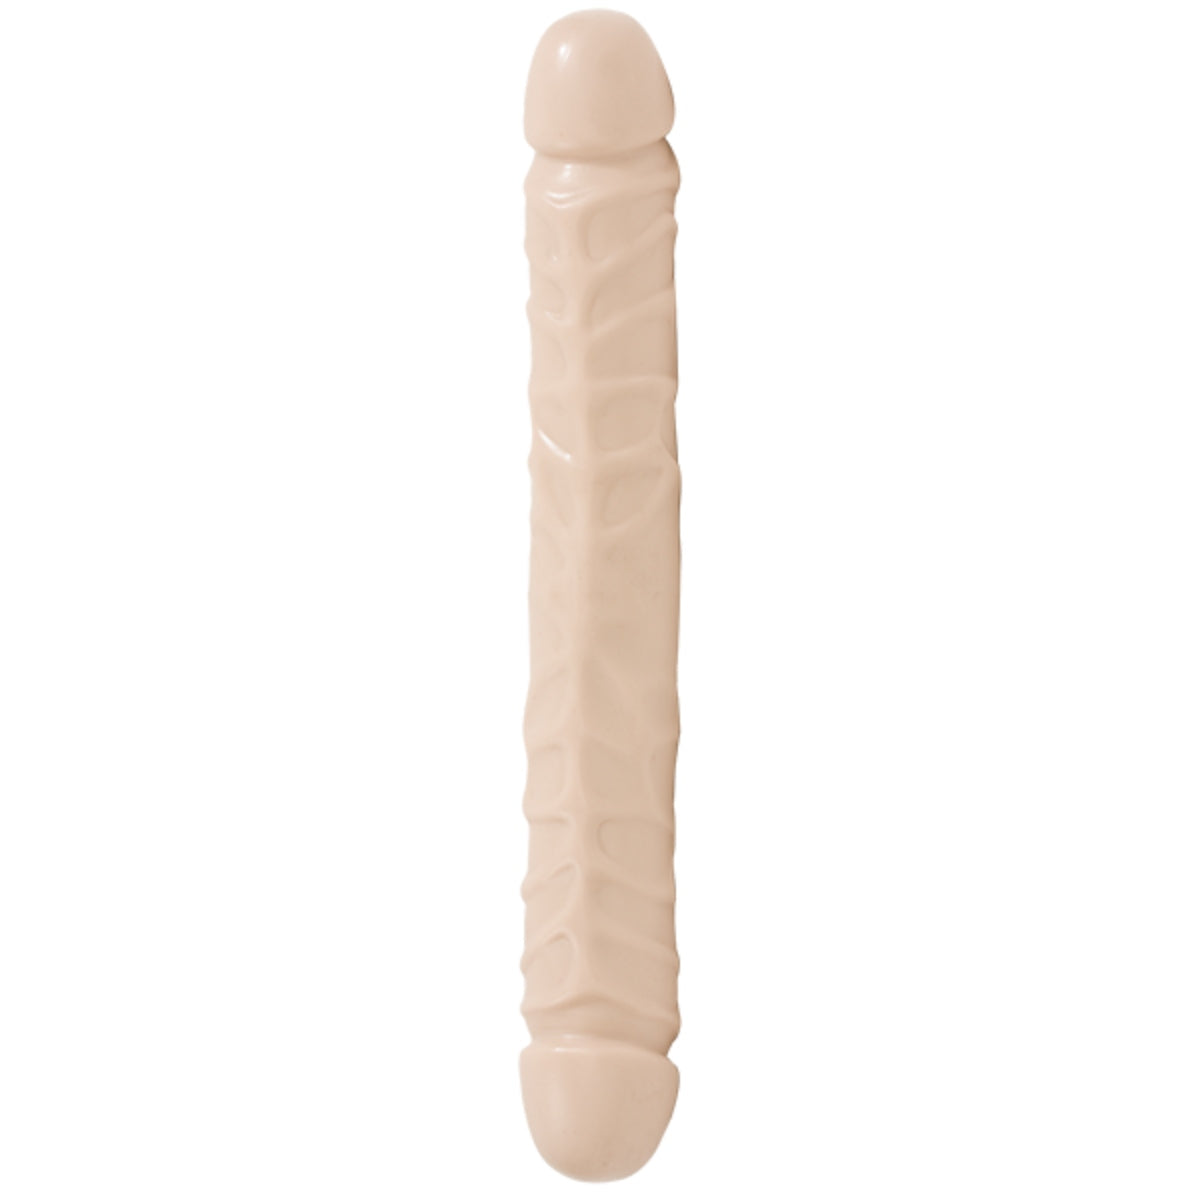 Doc Johnson Jr. Veined Double Ended Dildo Pink 12 Inch